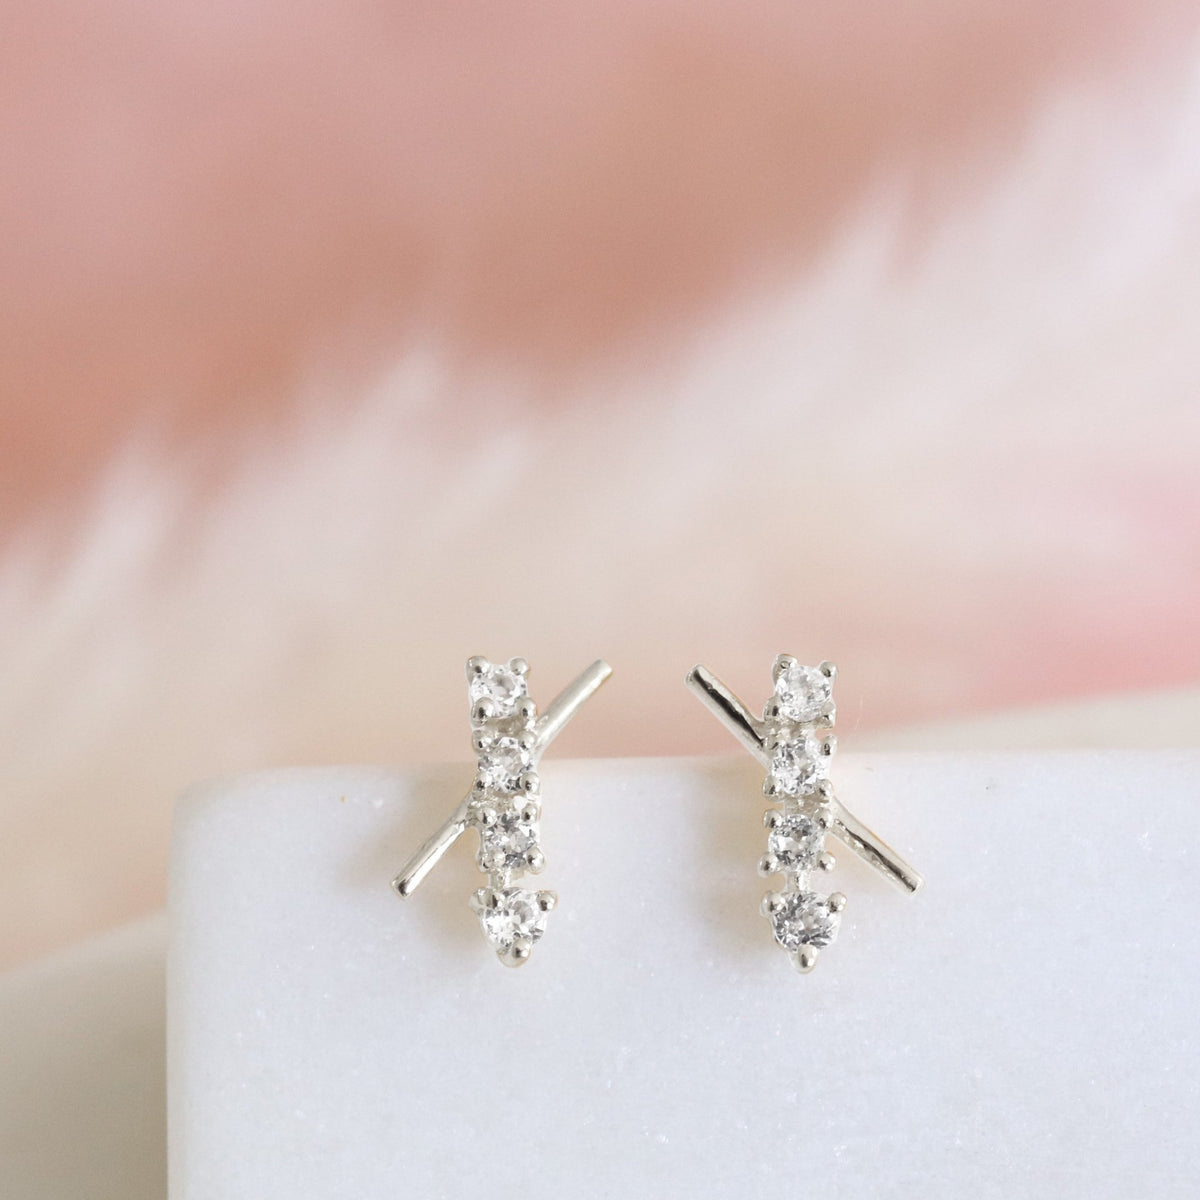 TINY DREAM STARDUST STUDS - CUBIC ZIRCONIA &amp; SILVER - SO PRETTY CARA COTTER